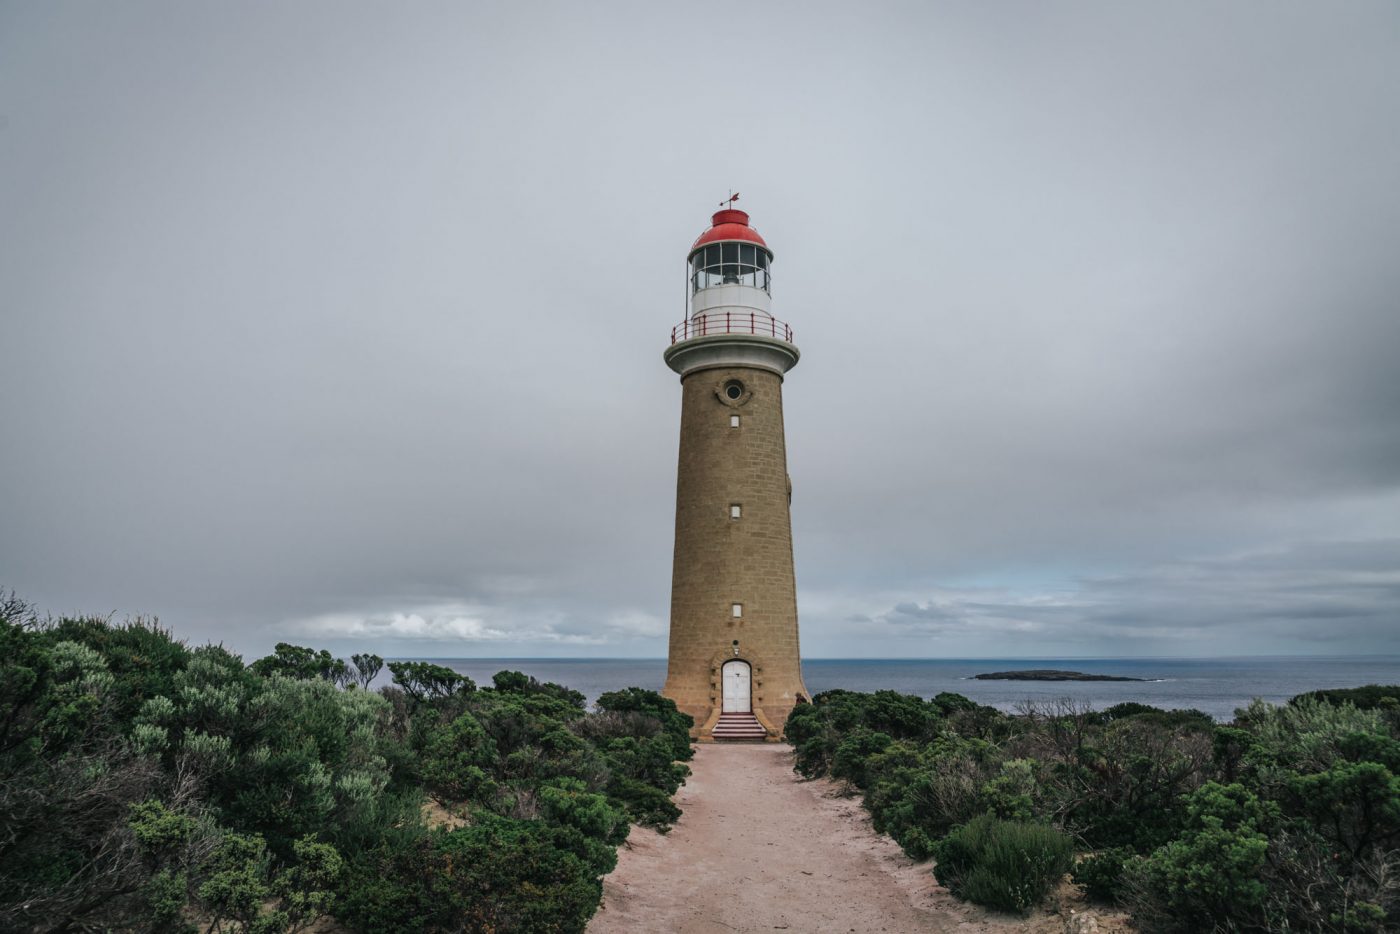 Lighthouse at Cape du Couedic, things to do in kangaroo island